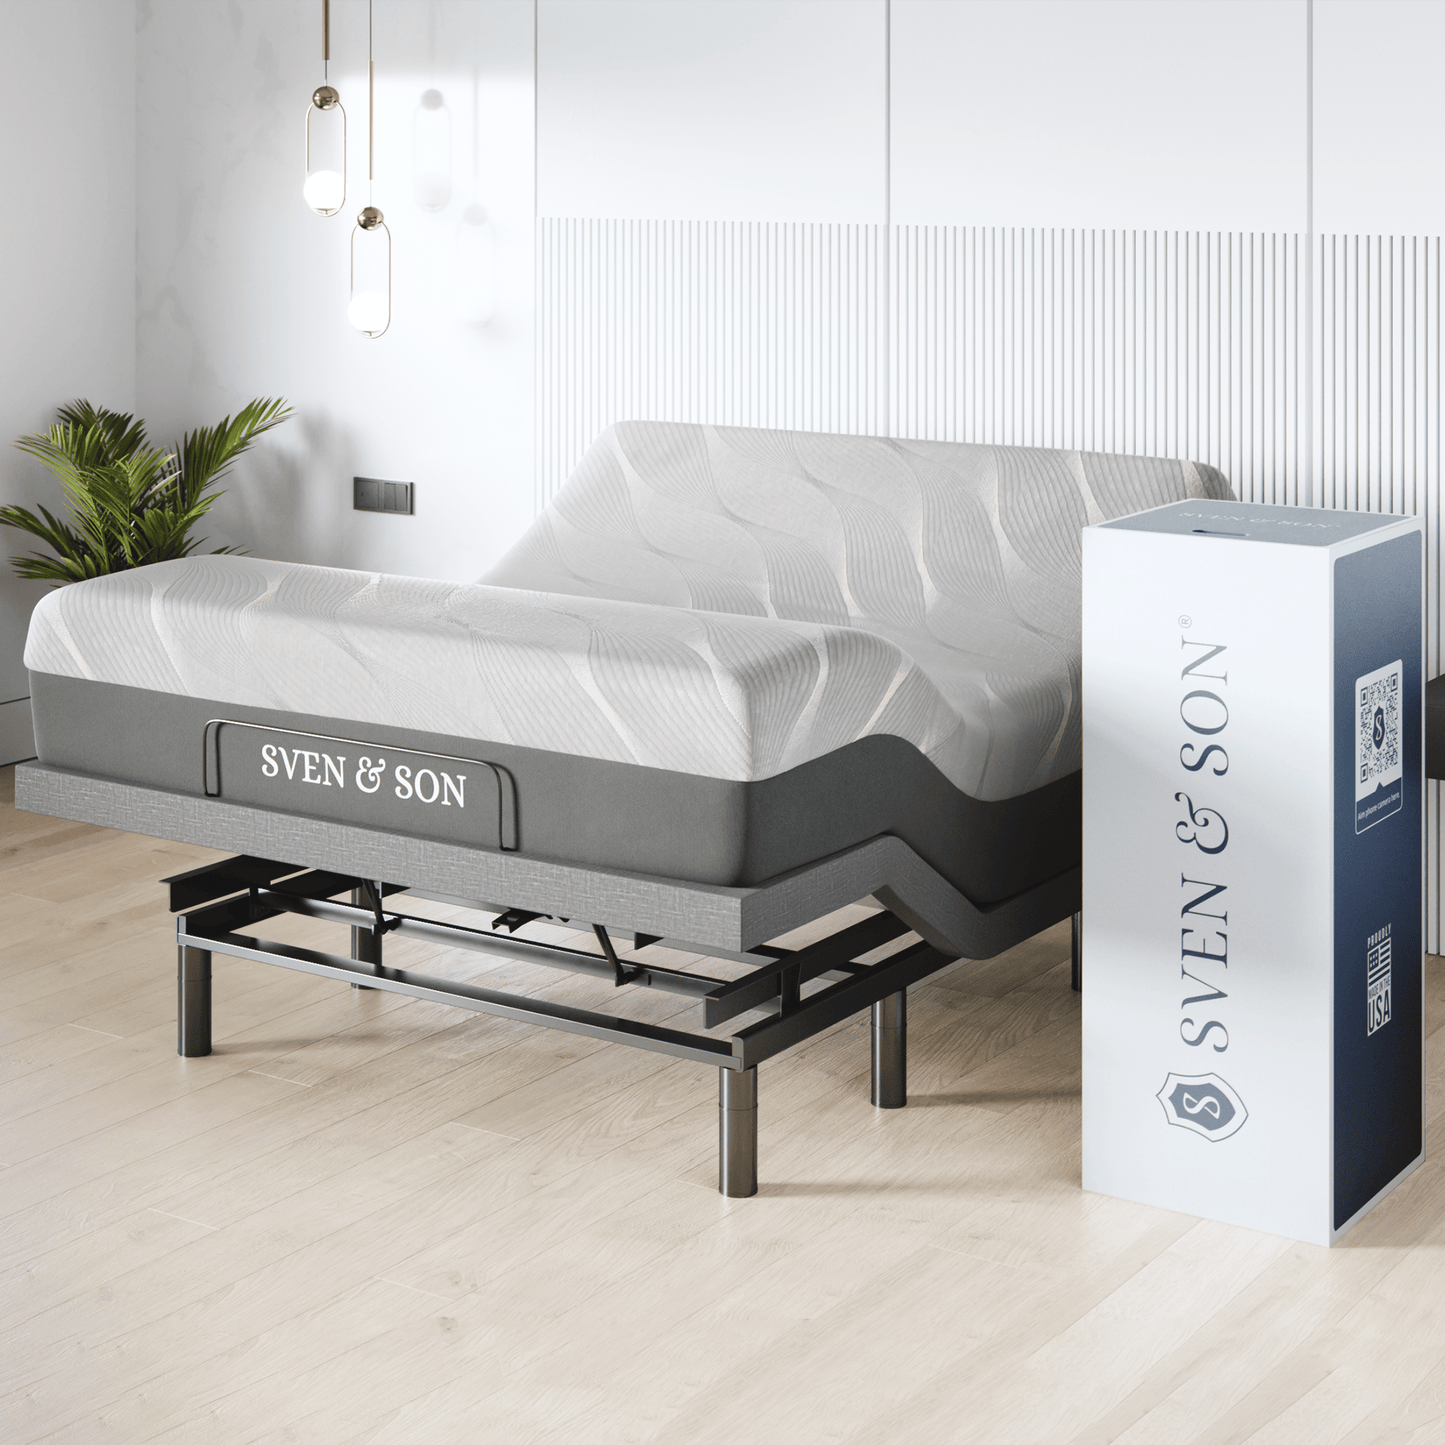 Classic+ Series Adjustable Bed Base + Choice of Mattress Bundle bundle SVEN & SON® Full 10" Firm 